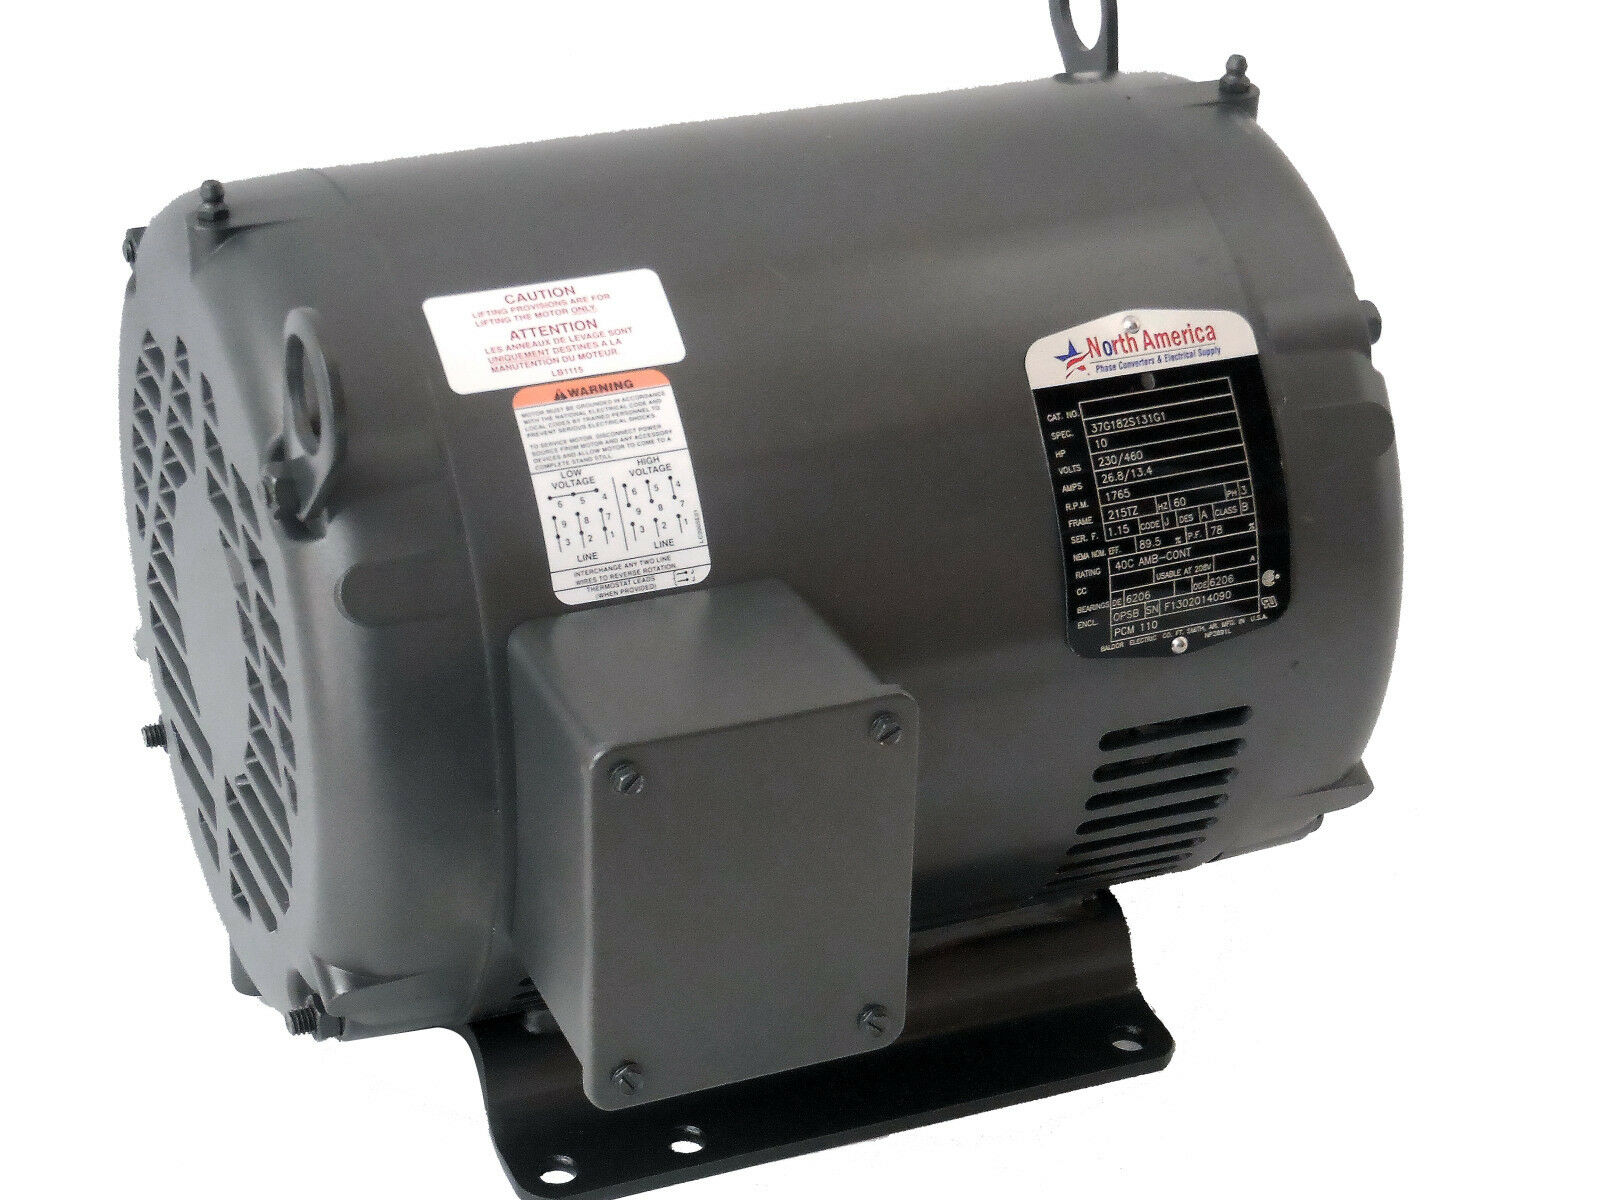 UL-15 Pro-Line 15HP UL Listed Rotary Phase Converter - NEW - Free Shipping